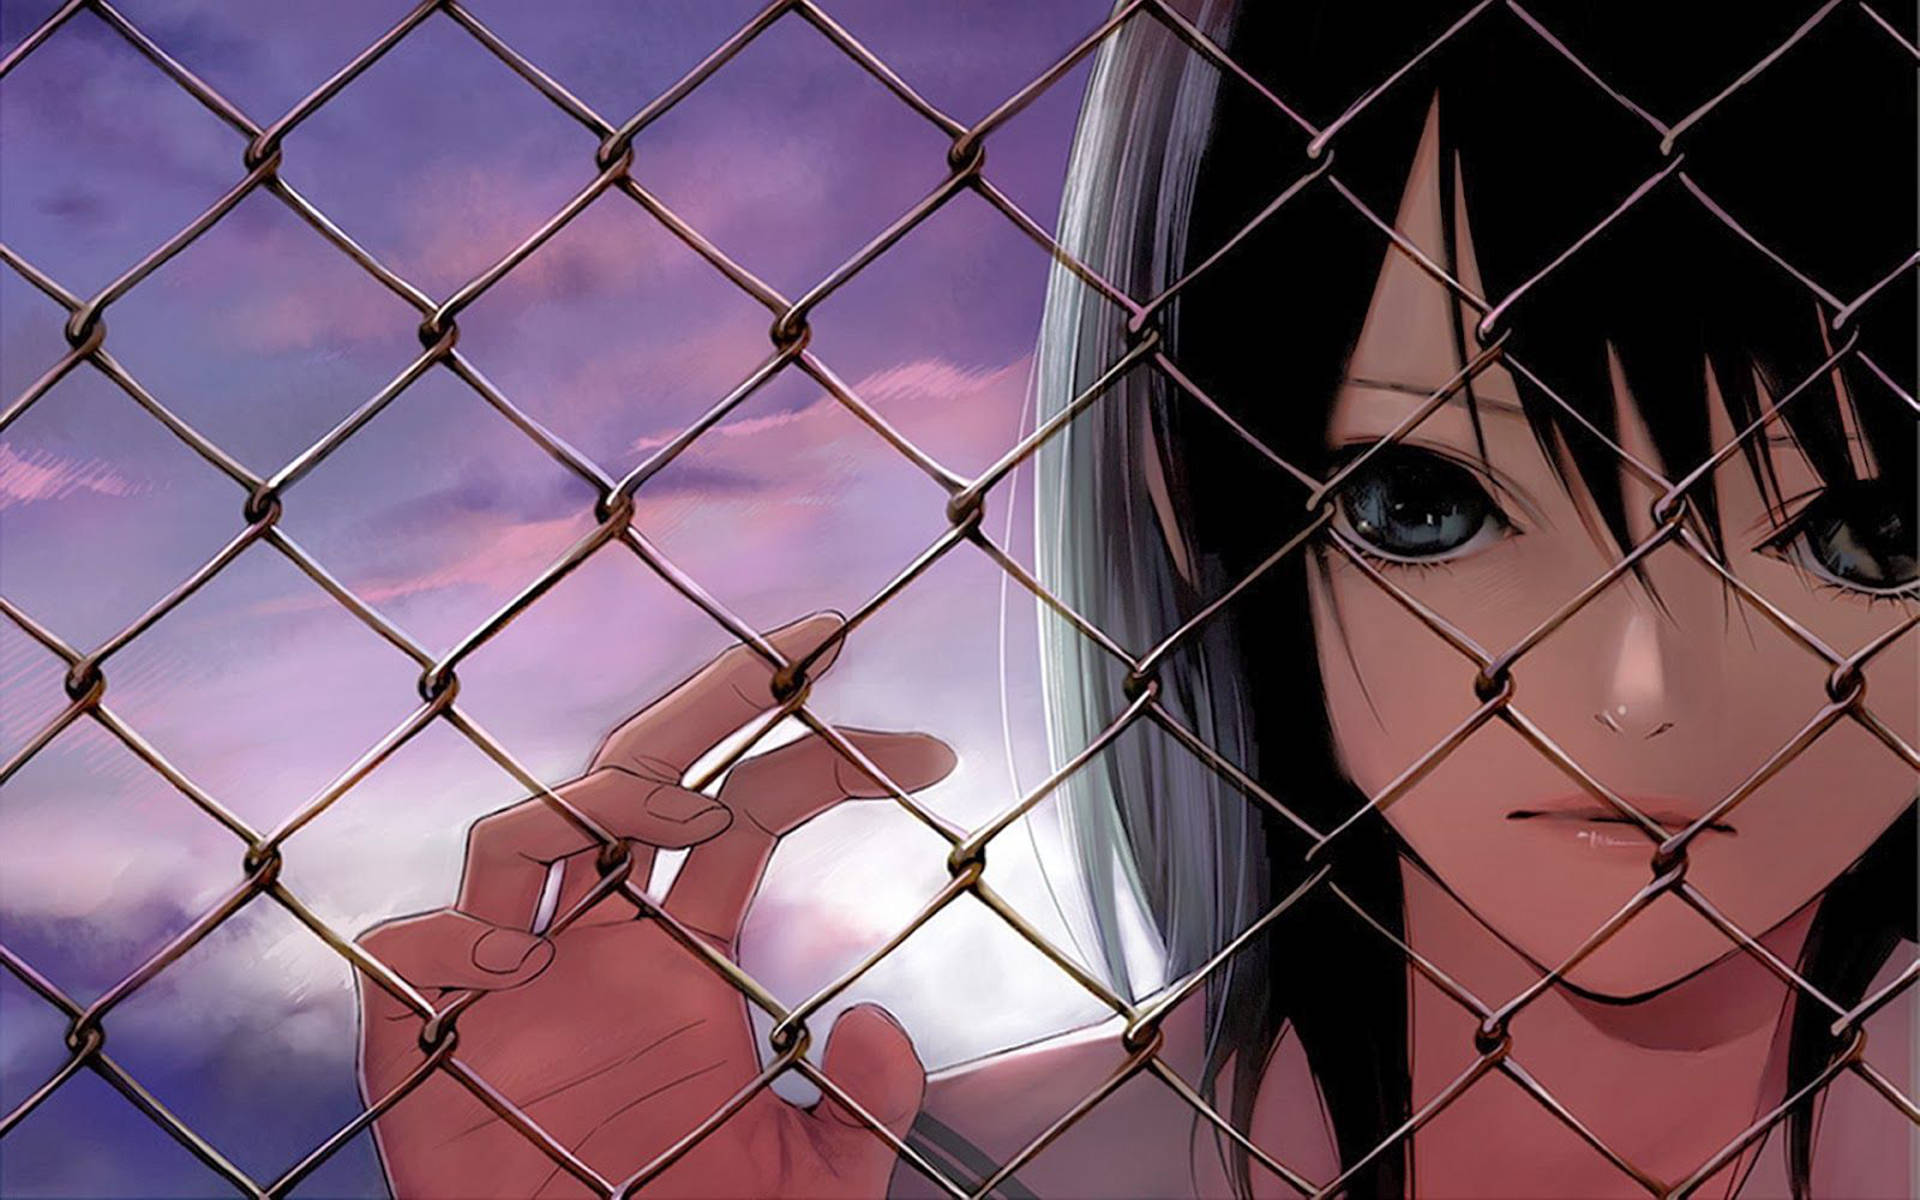 Staring Sad Girl In The Fence